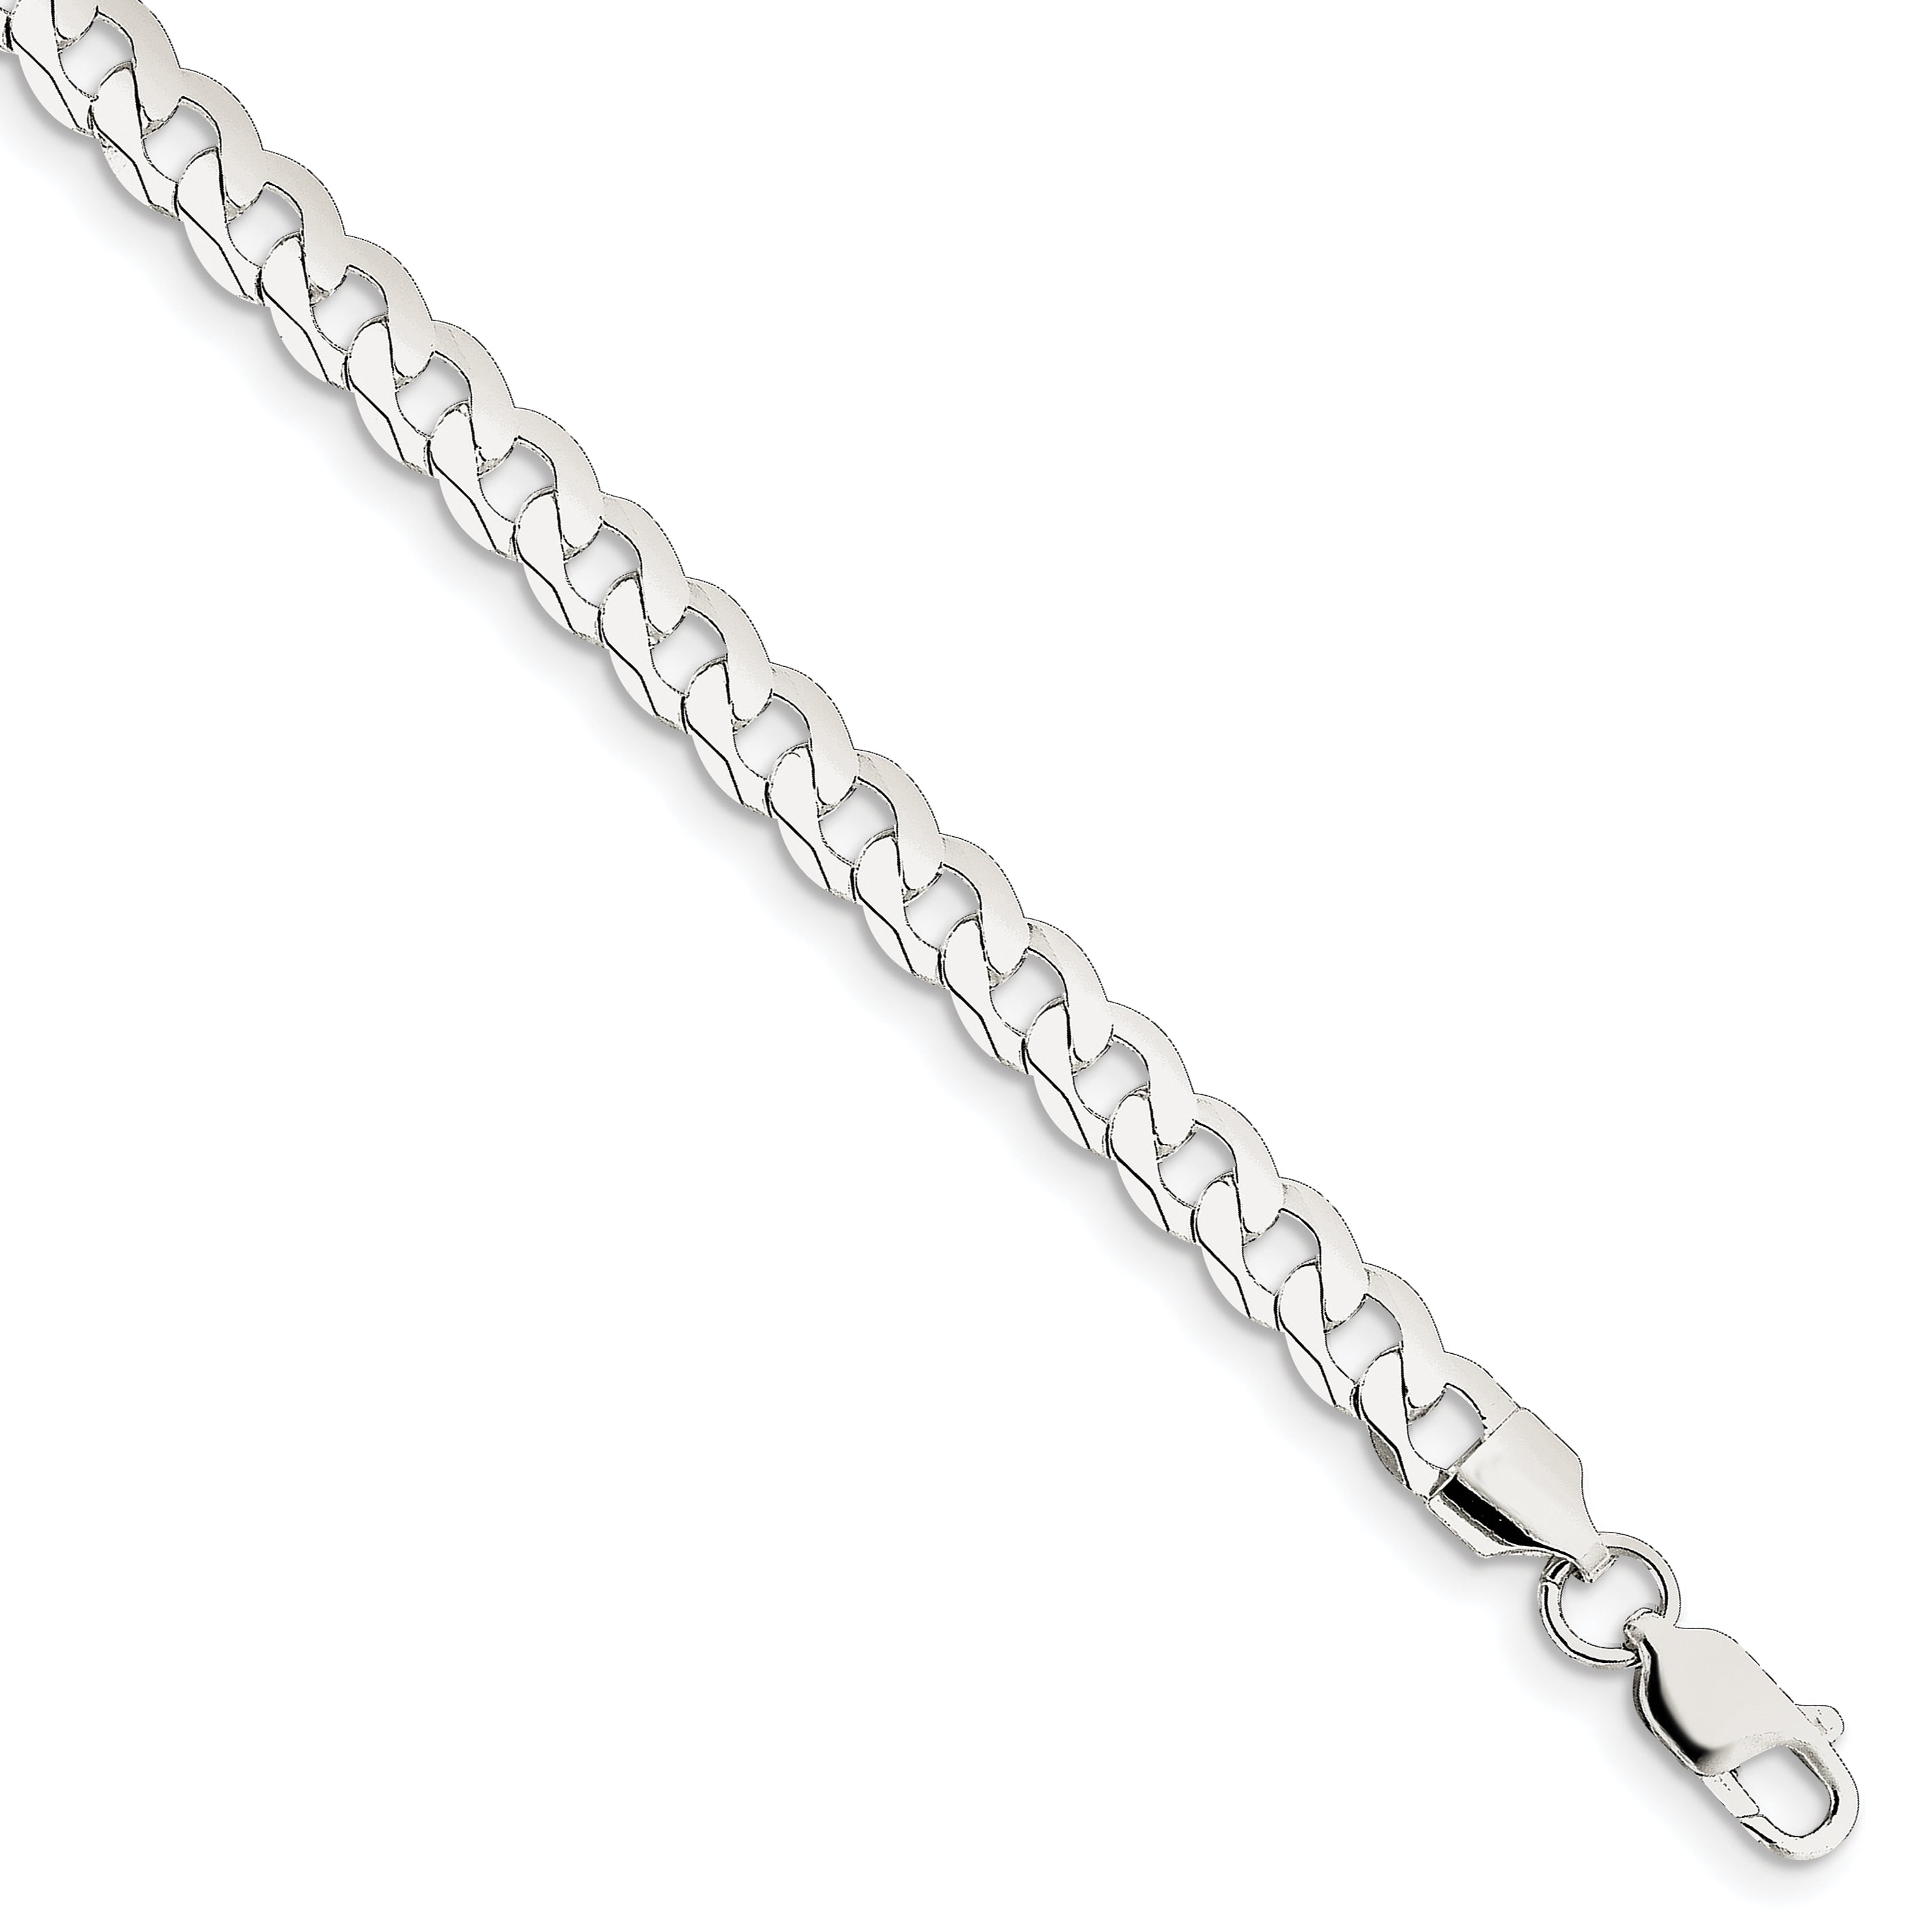 18" 21''INCH GENUINE 925 STERLING SILVER CHAIN NECKLACE CURB AND BELCHER  ROPE